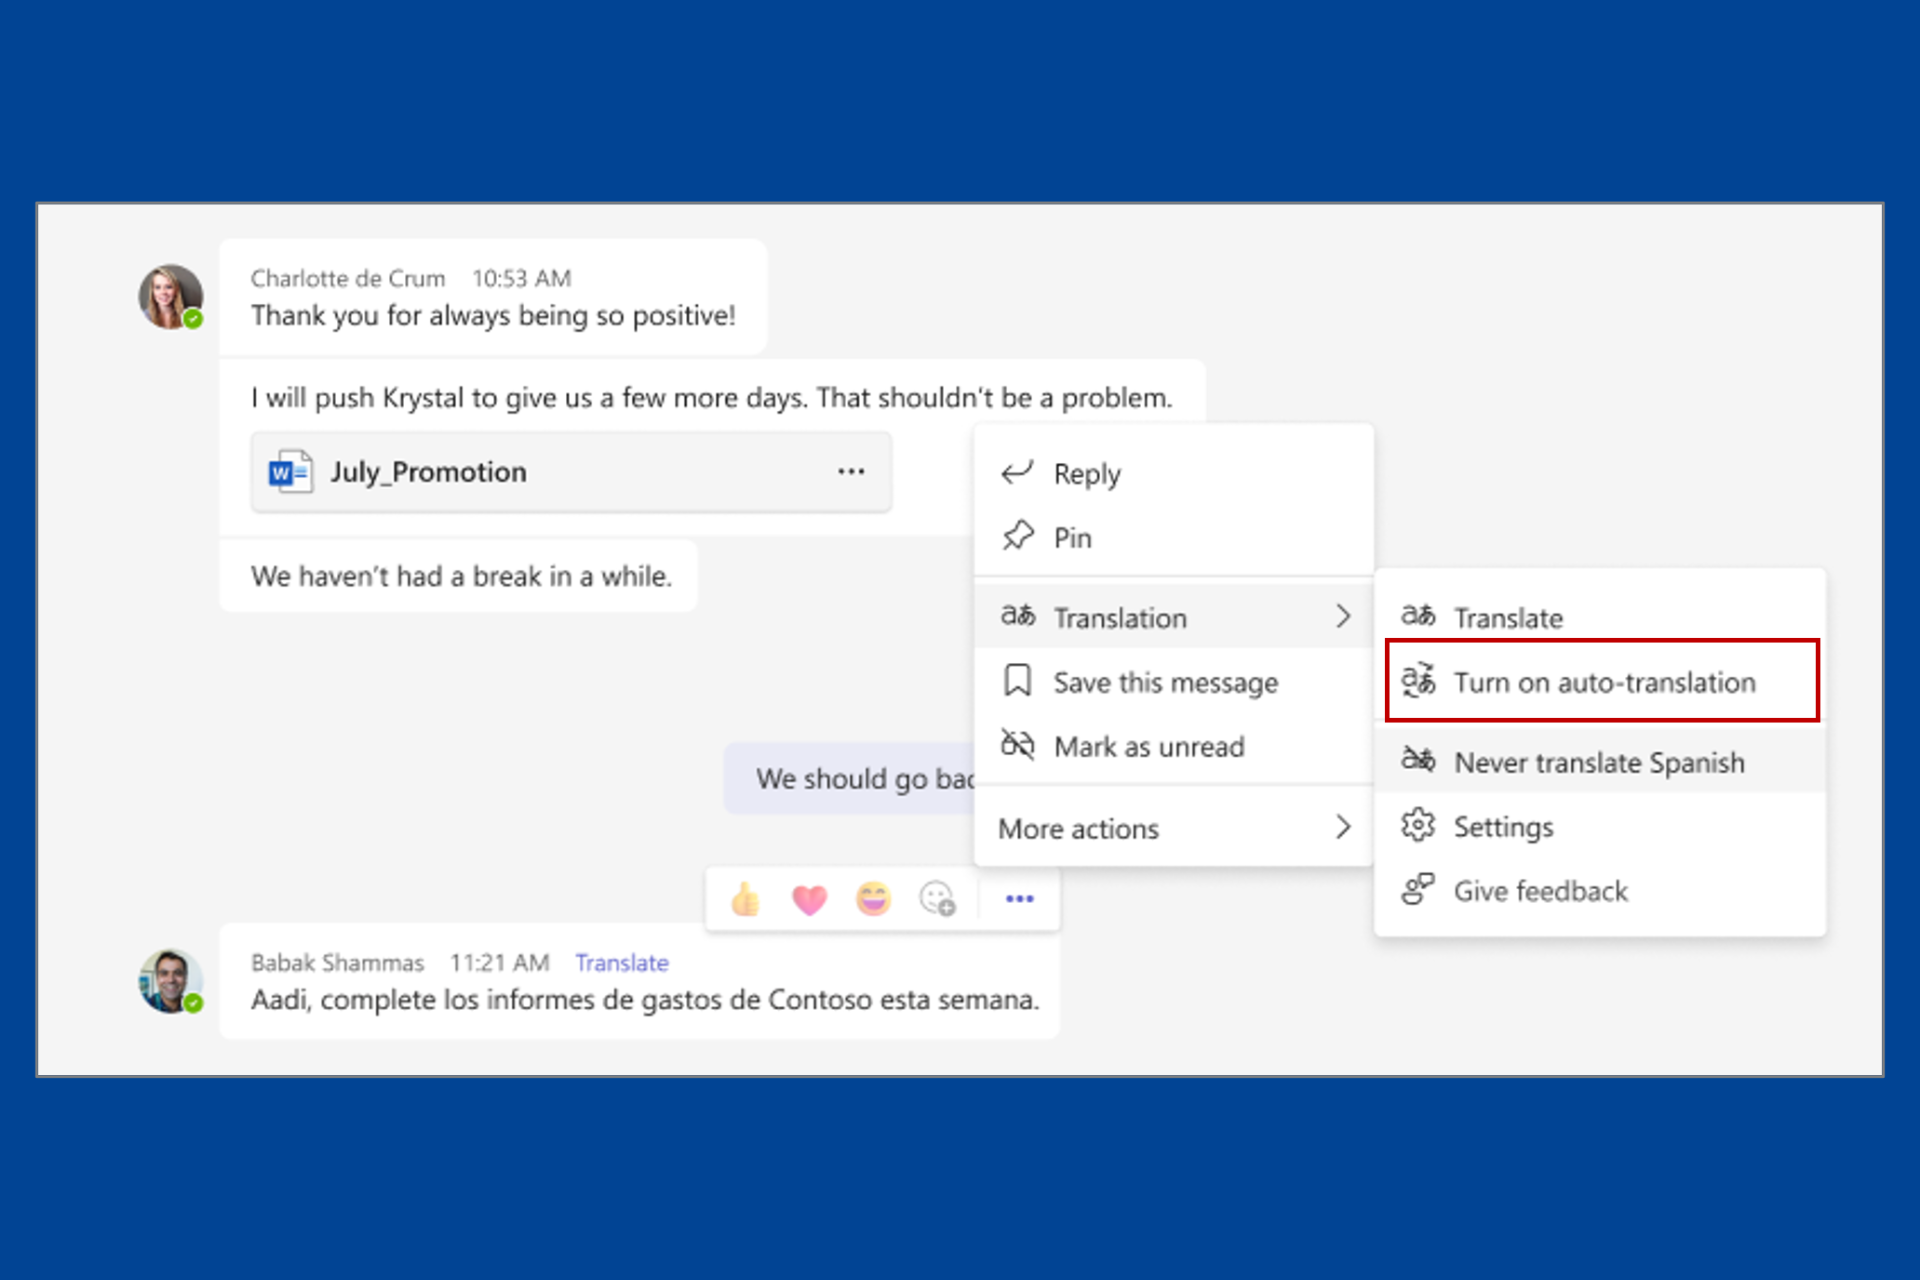 Microsoft Teams gets the Intelligent message translation in chats feature